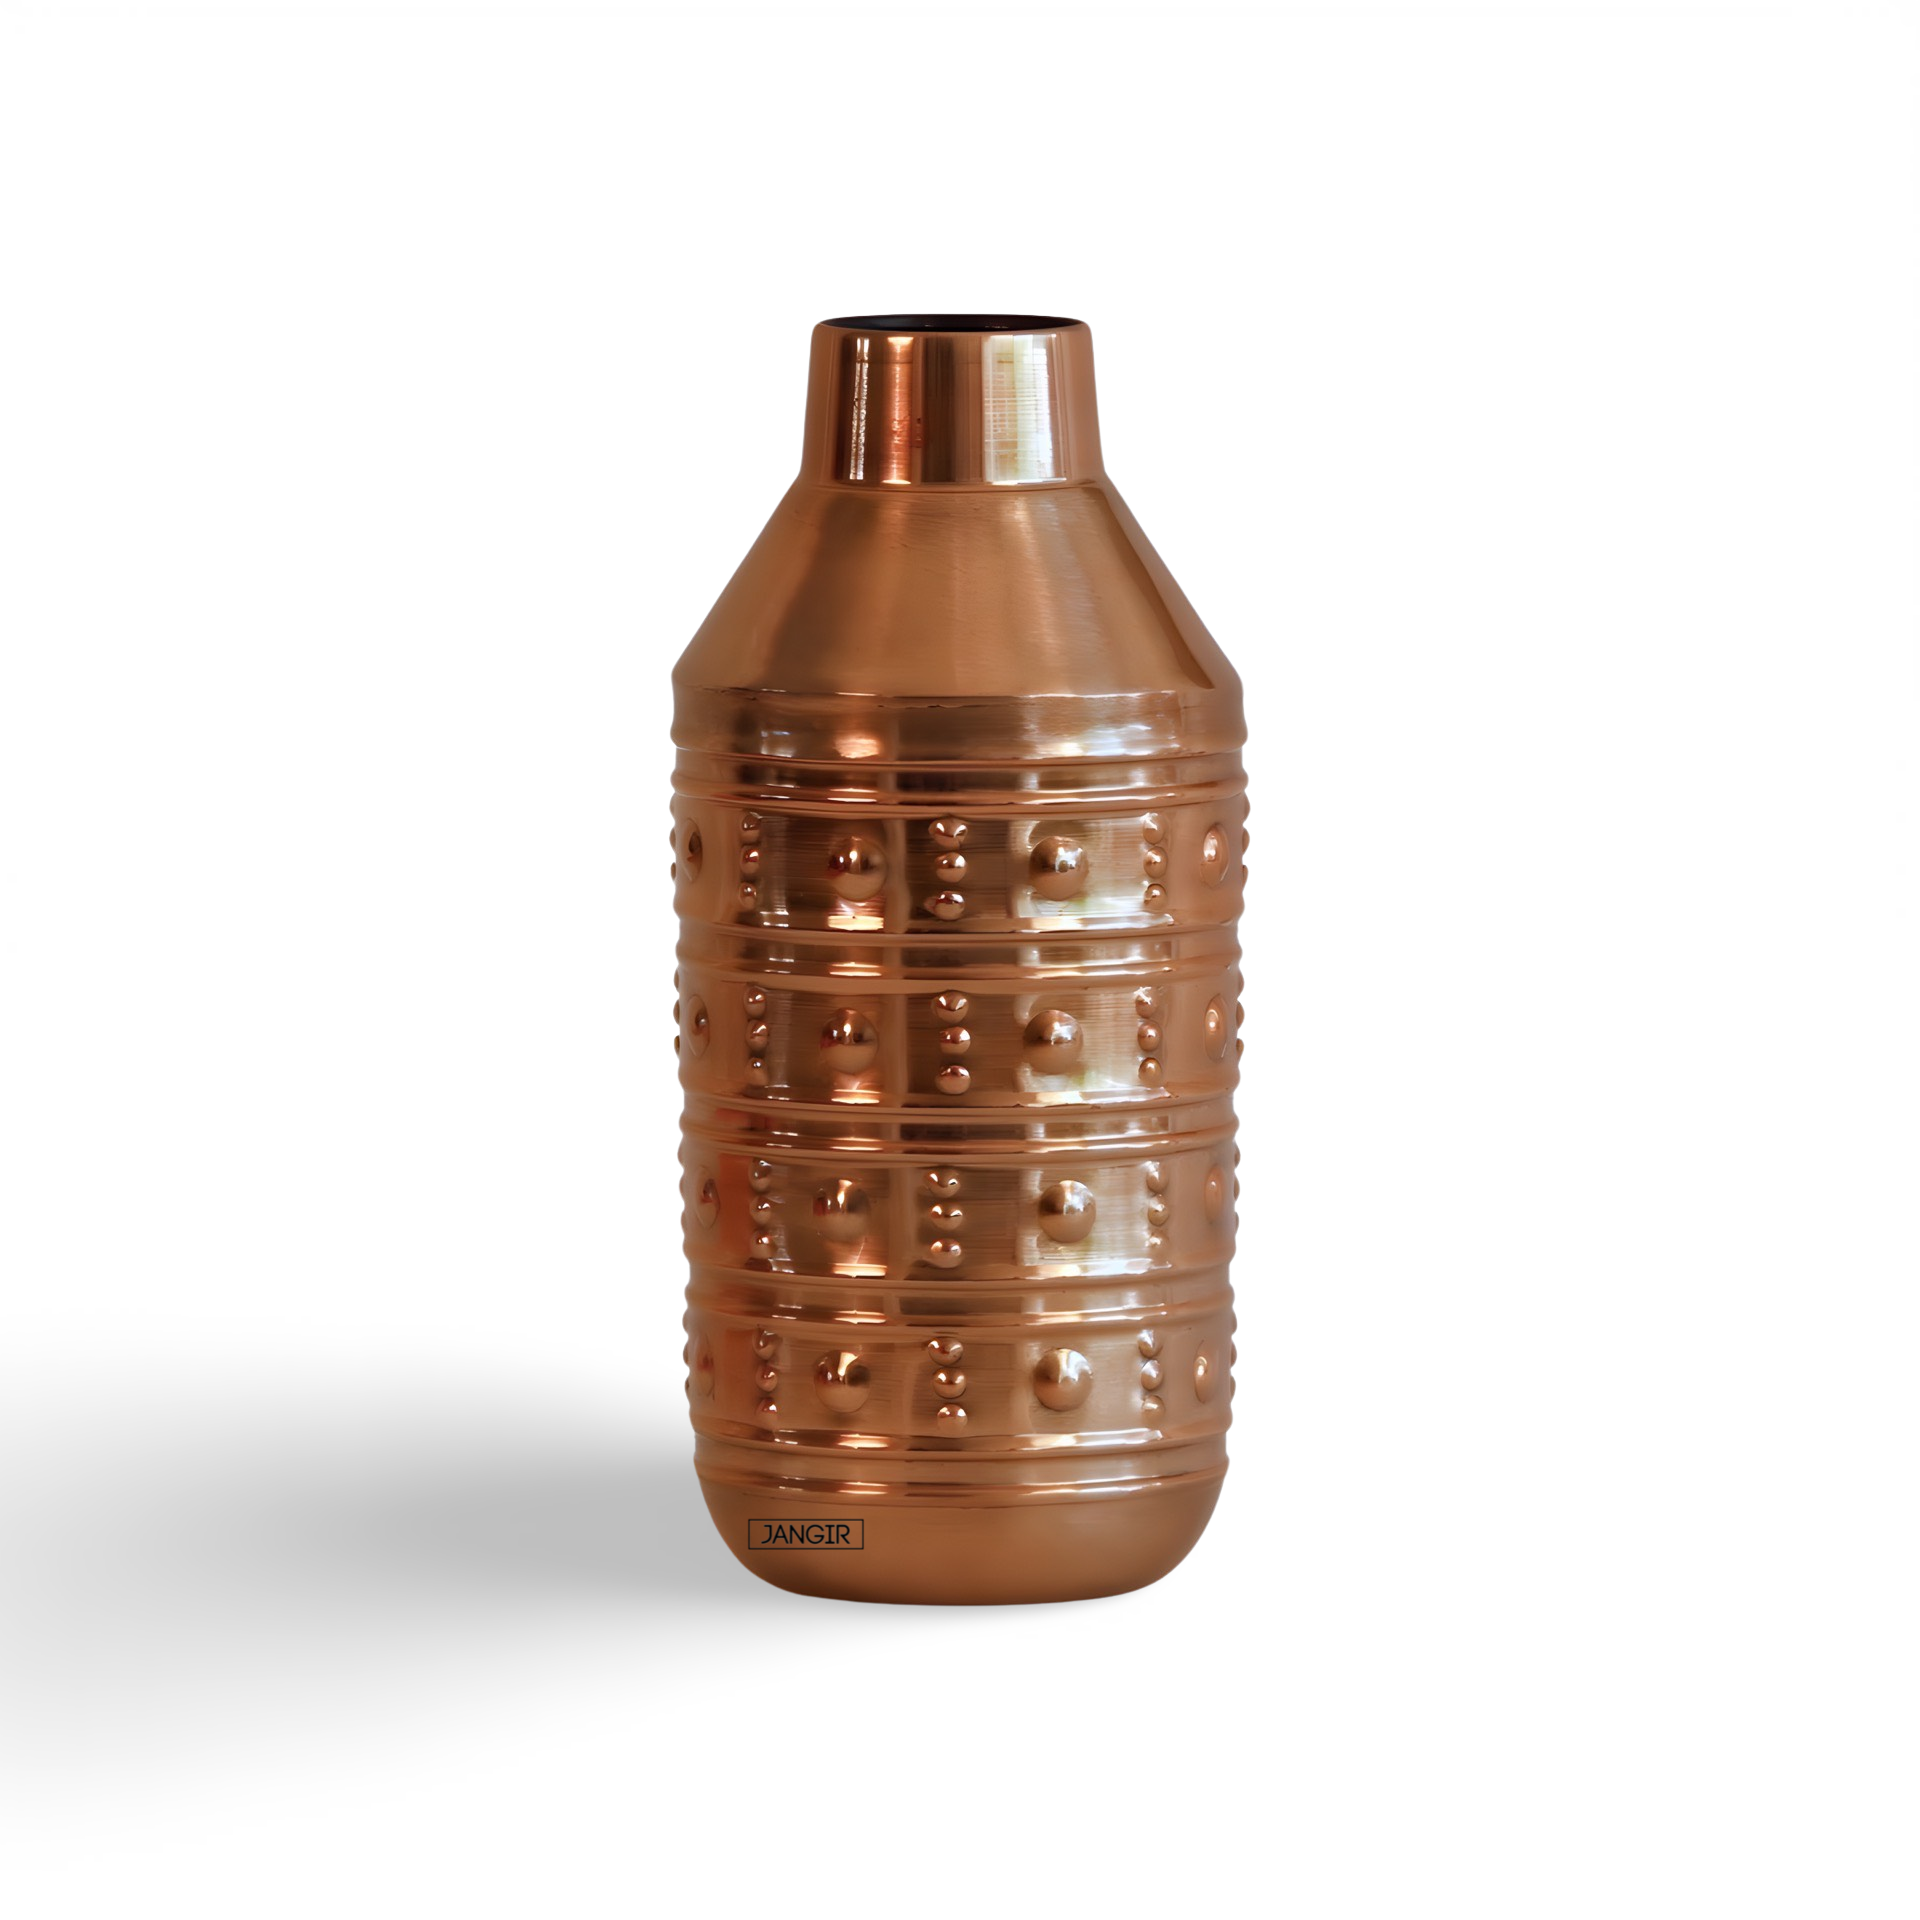 Elevate your home decor with our elegant Rose Gold Bottle Flower Vase S. Crafted from high-quality metal. Shop now for the perfect addition to your living room, bedroom or office.